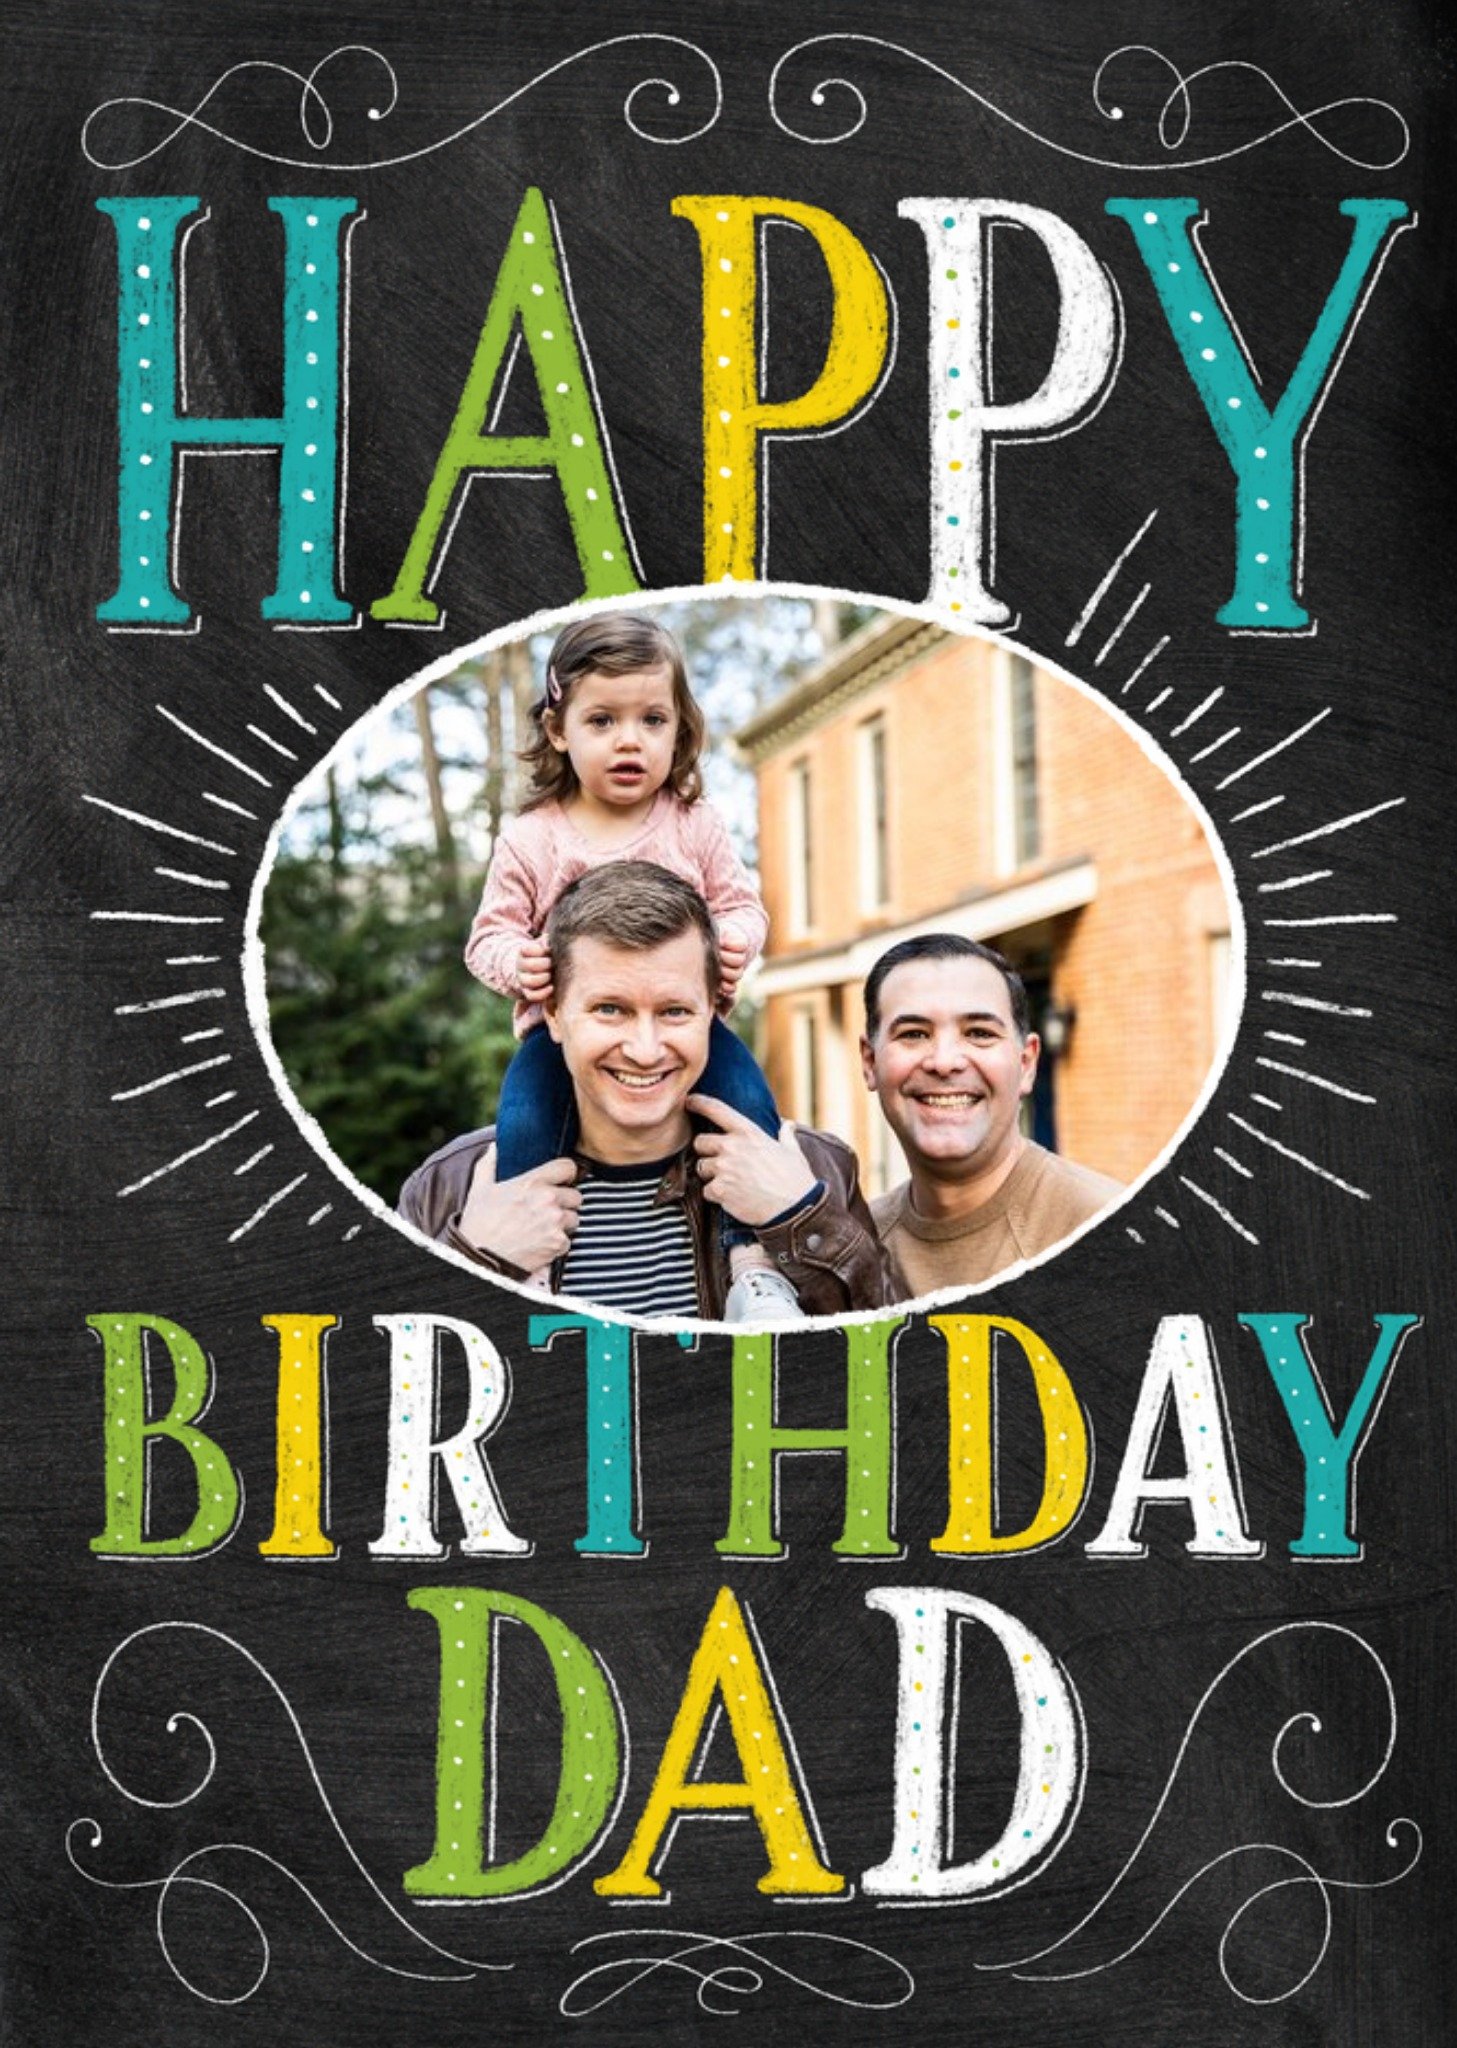 Moonpig Photo Birthday Card For Dad - Dad's Photo Upload Card, Large